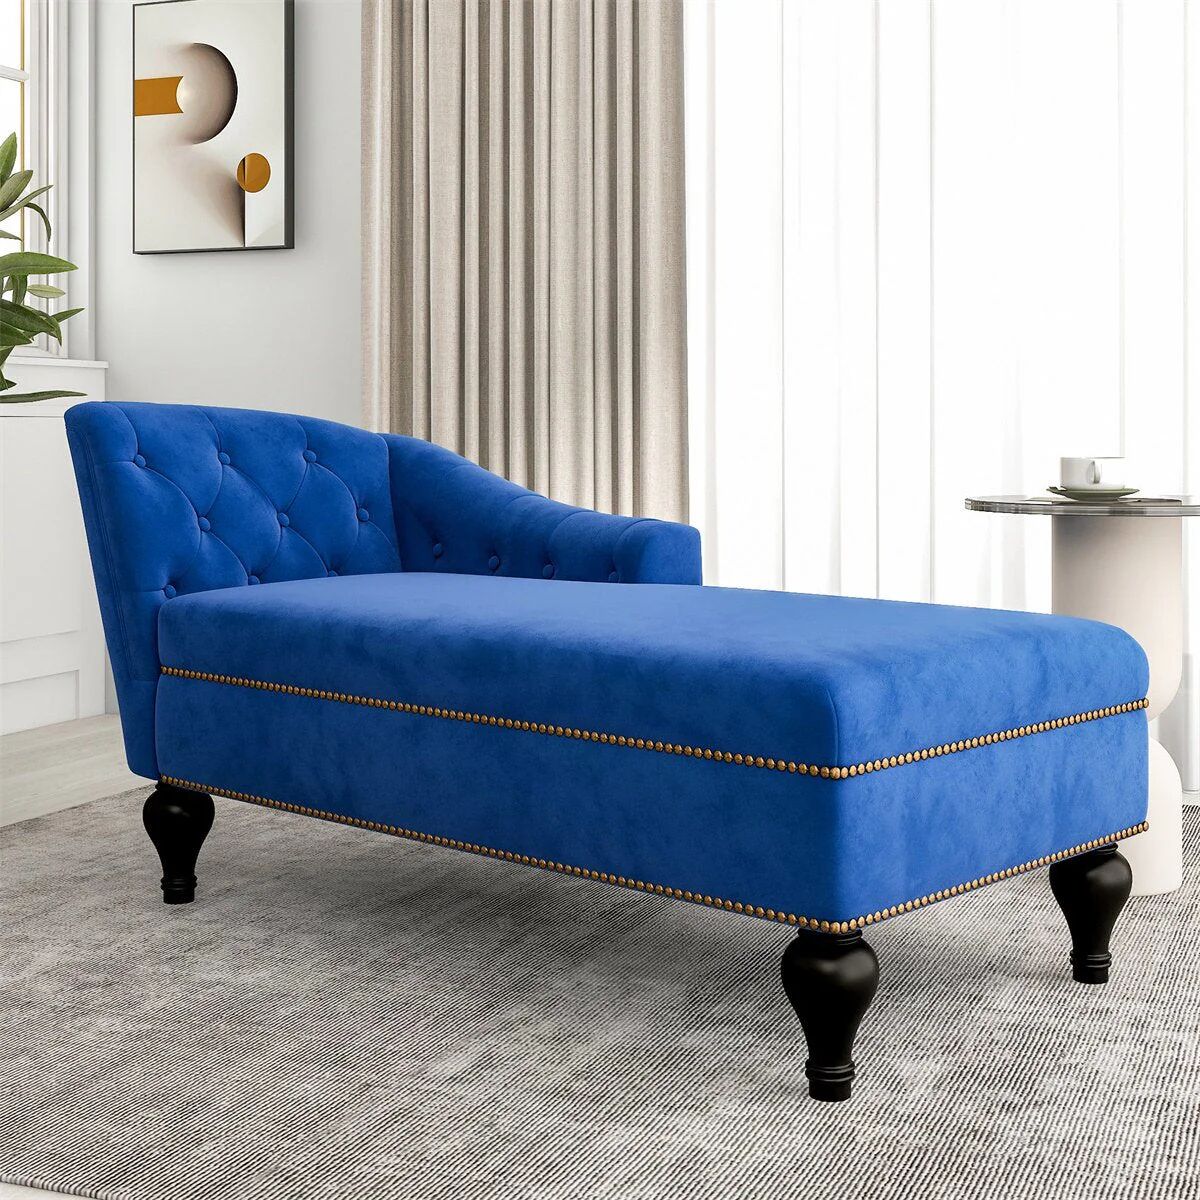 DailySale Chaise Lounge Indoor Chair Tufted Fabric, Sleeper Lounge Sofa